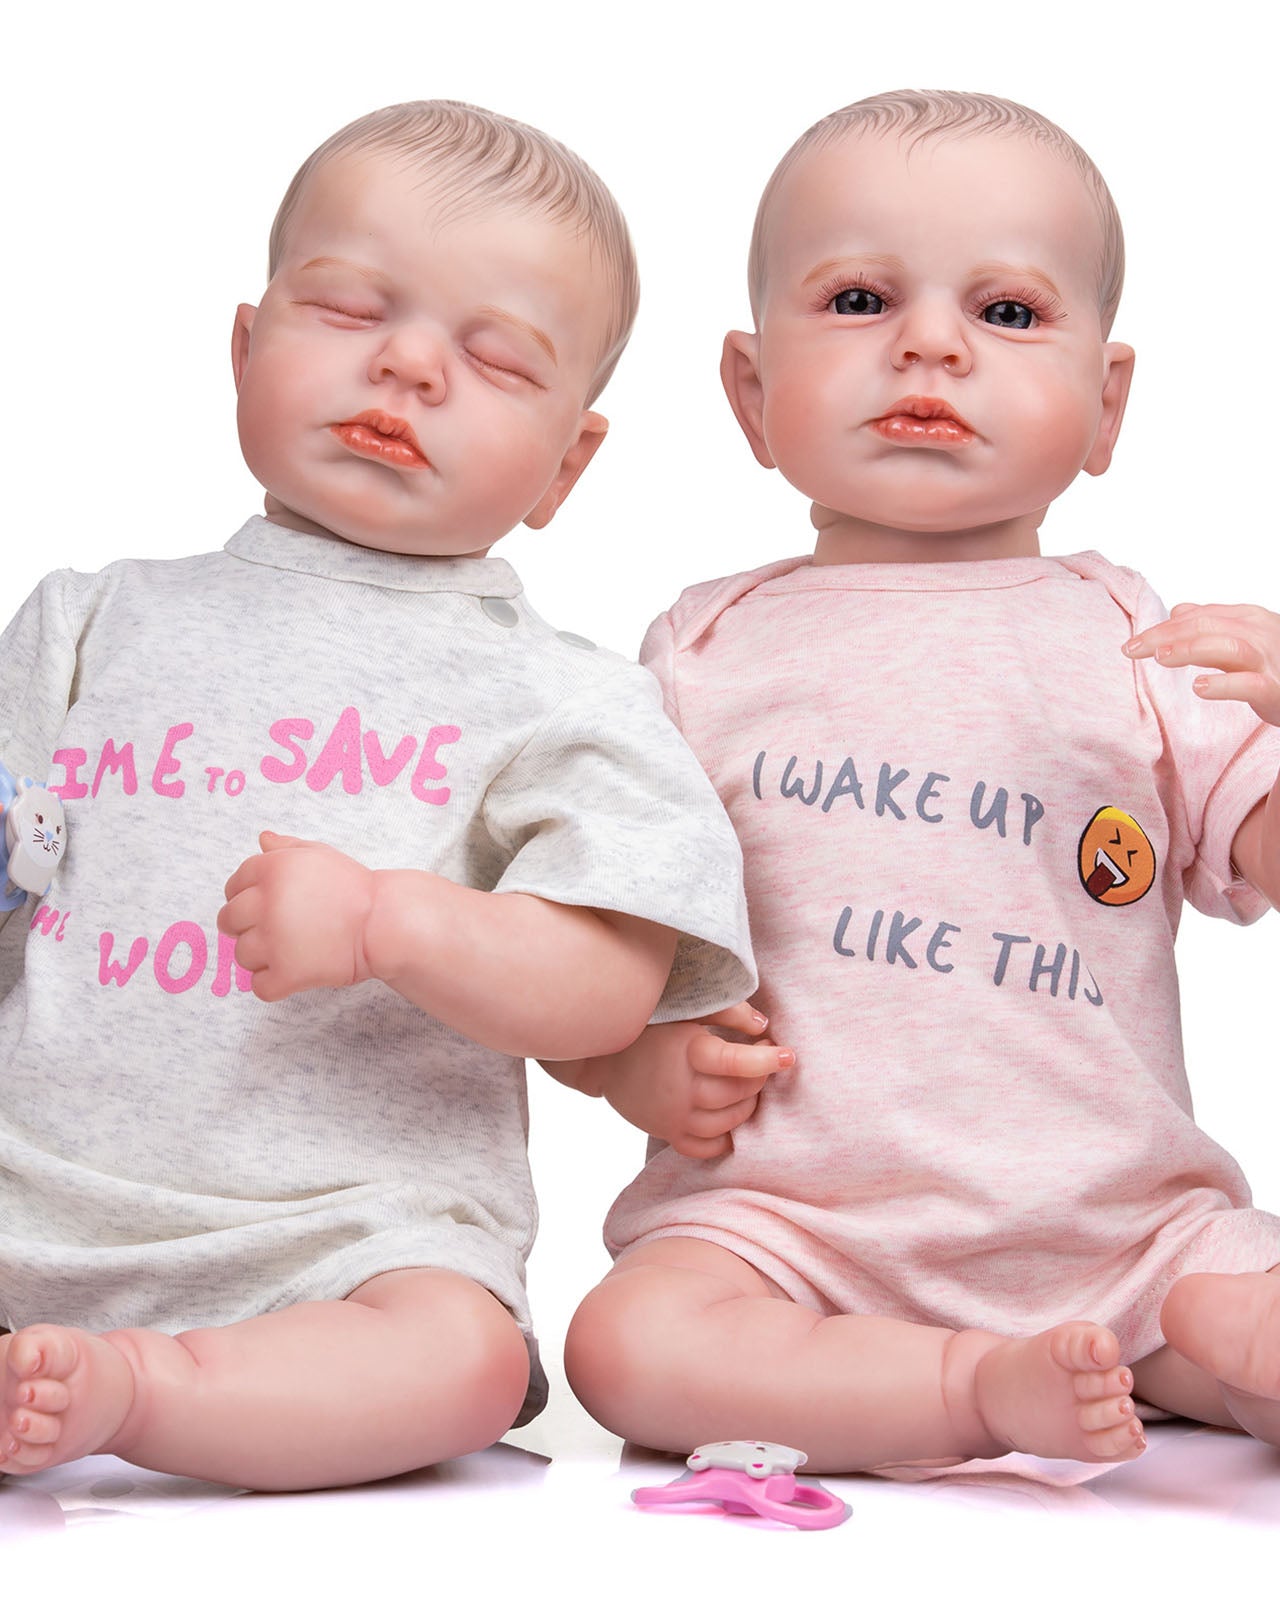 LouLou - 20" Reborn Baby Doll Newborn Twins Girls With Real Lifelike Soft Weighted Cloth Body